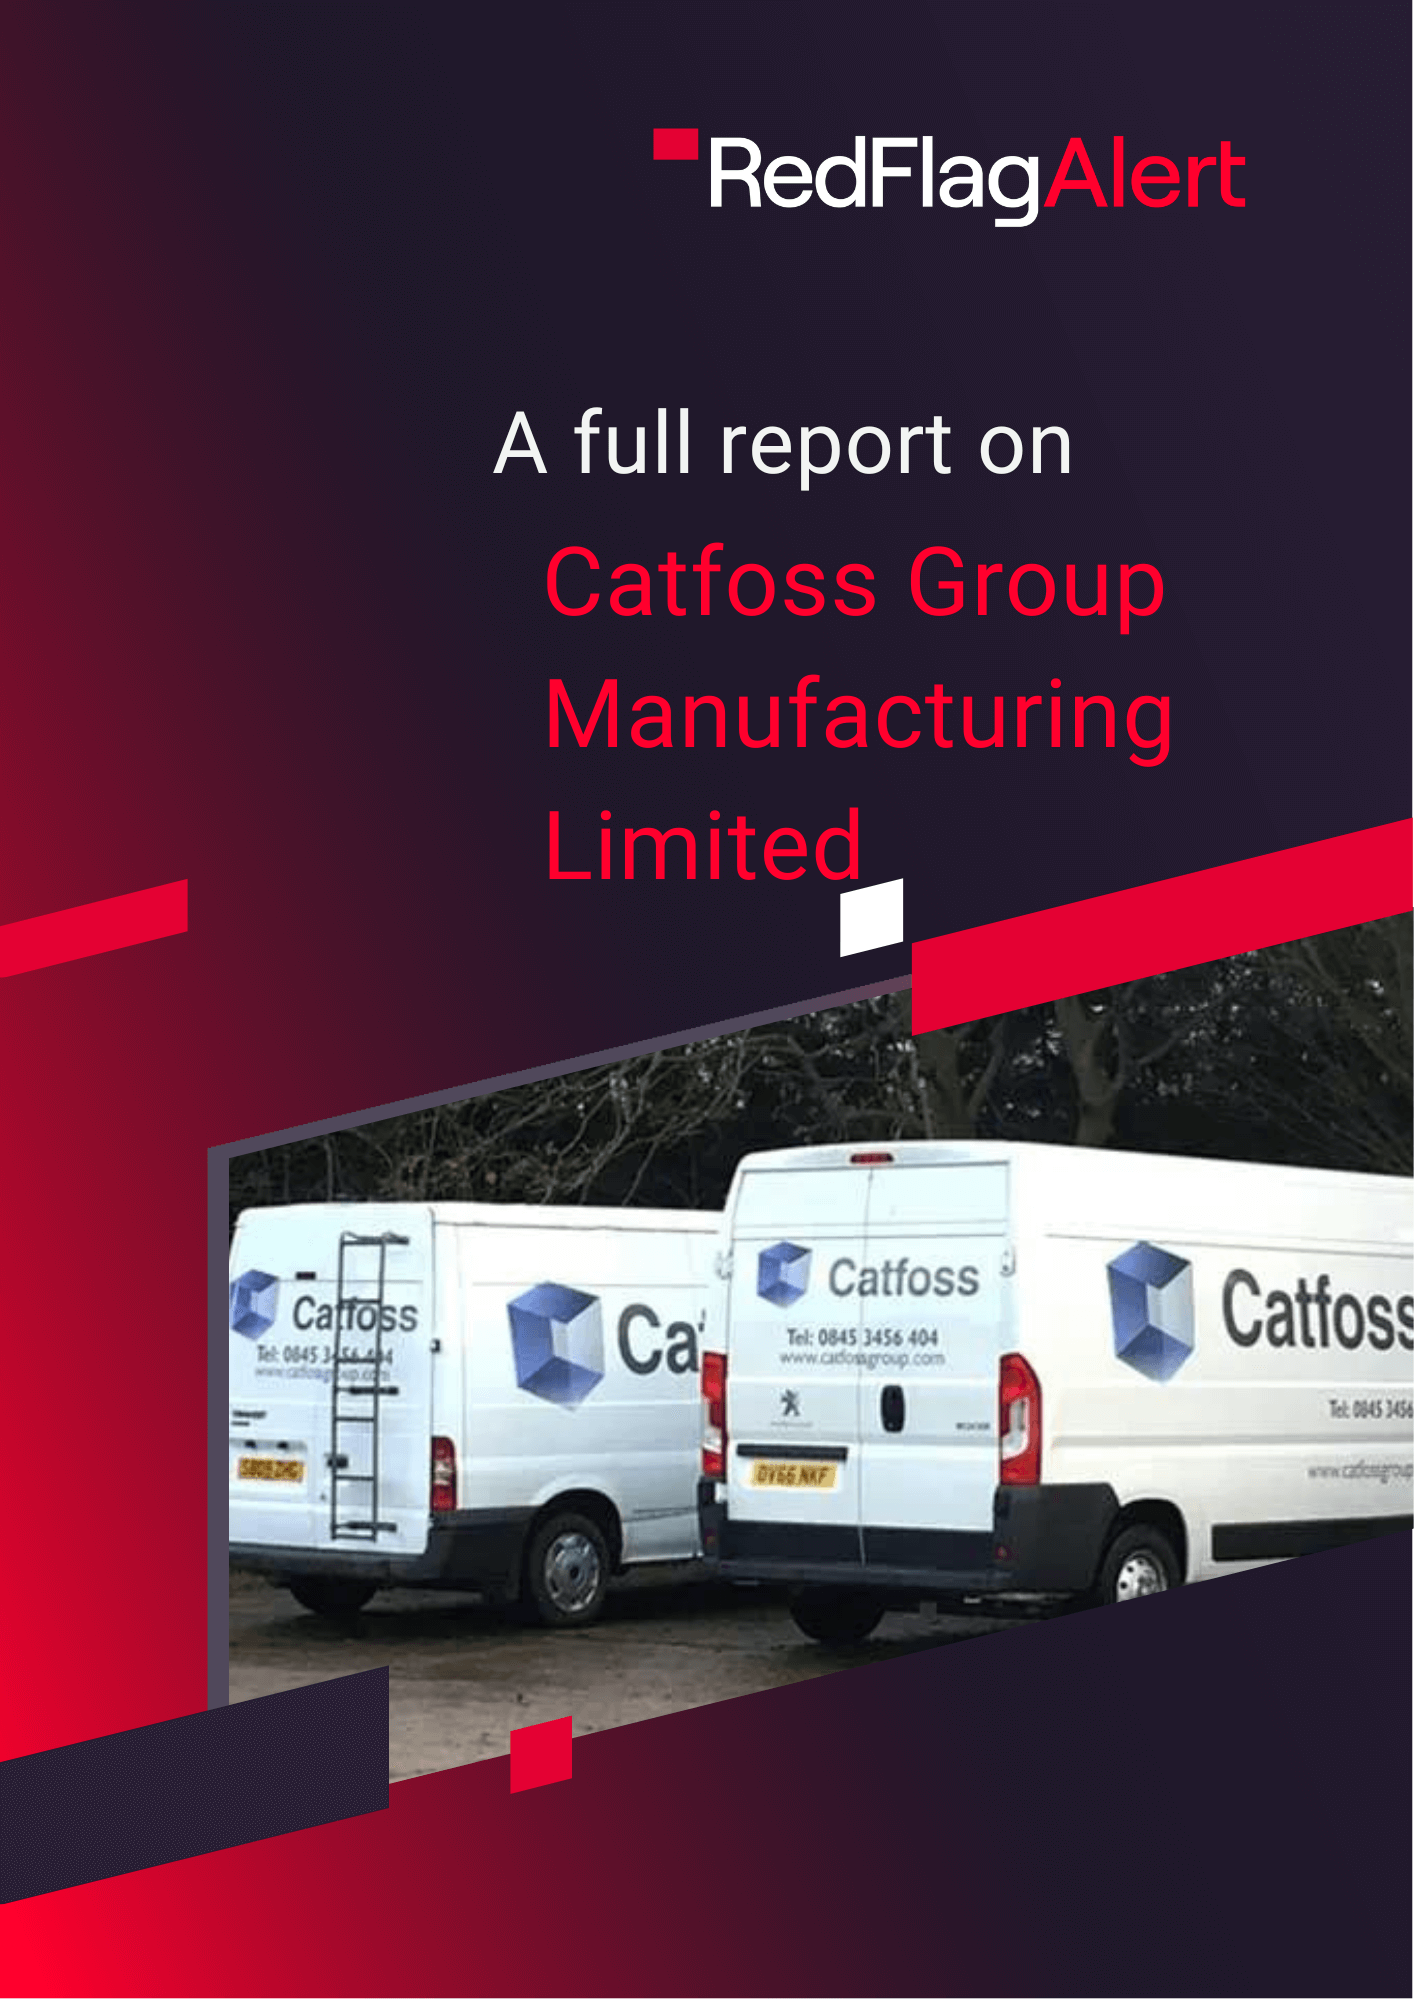 Catfoss Group Limited Manufacturing